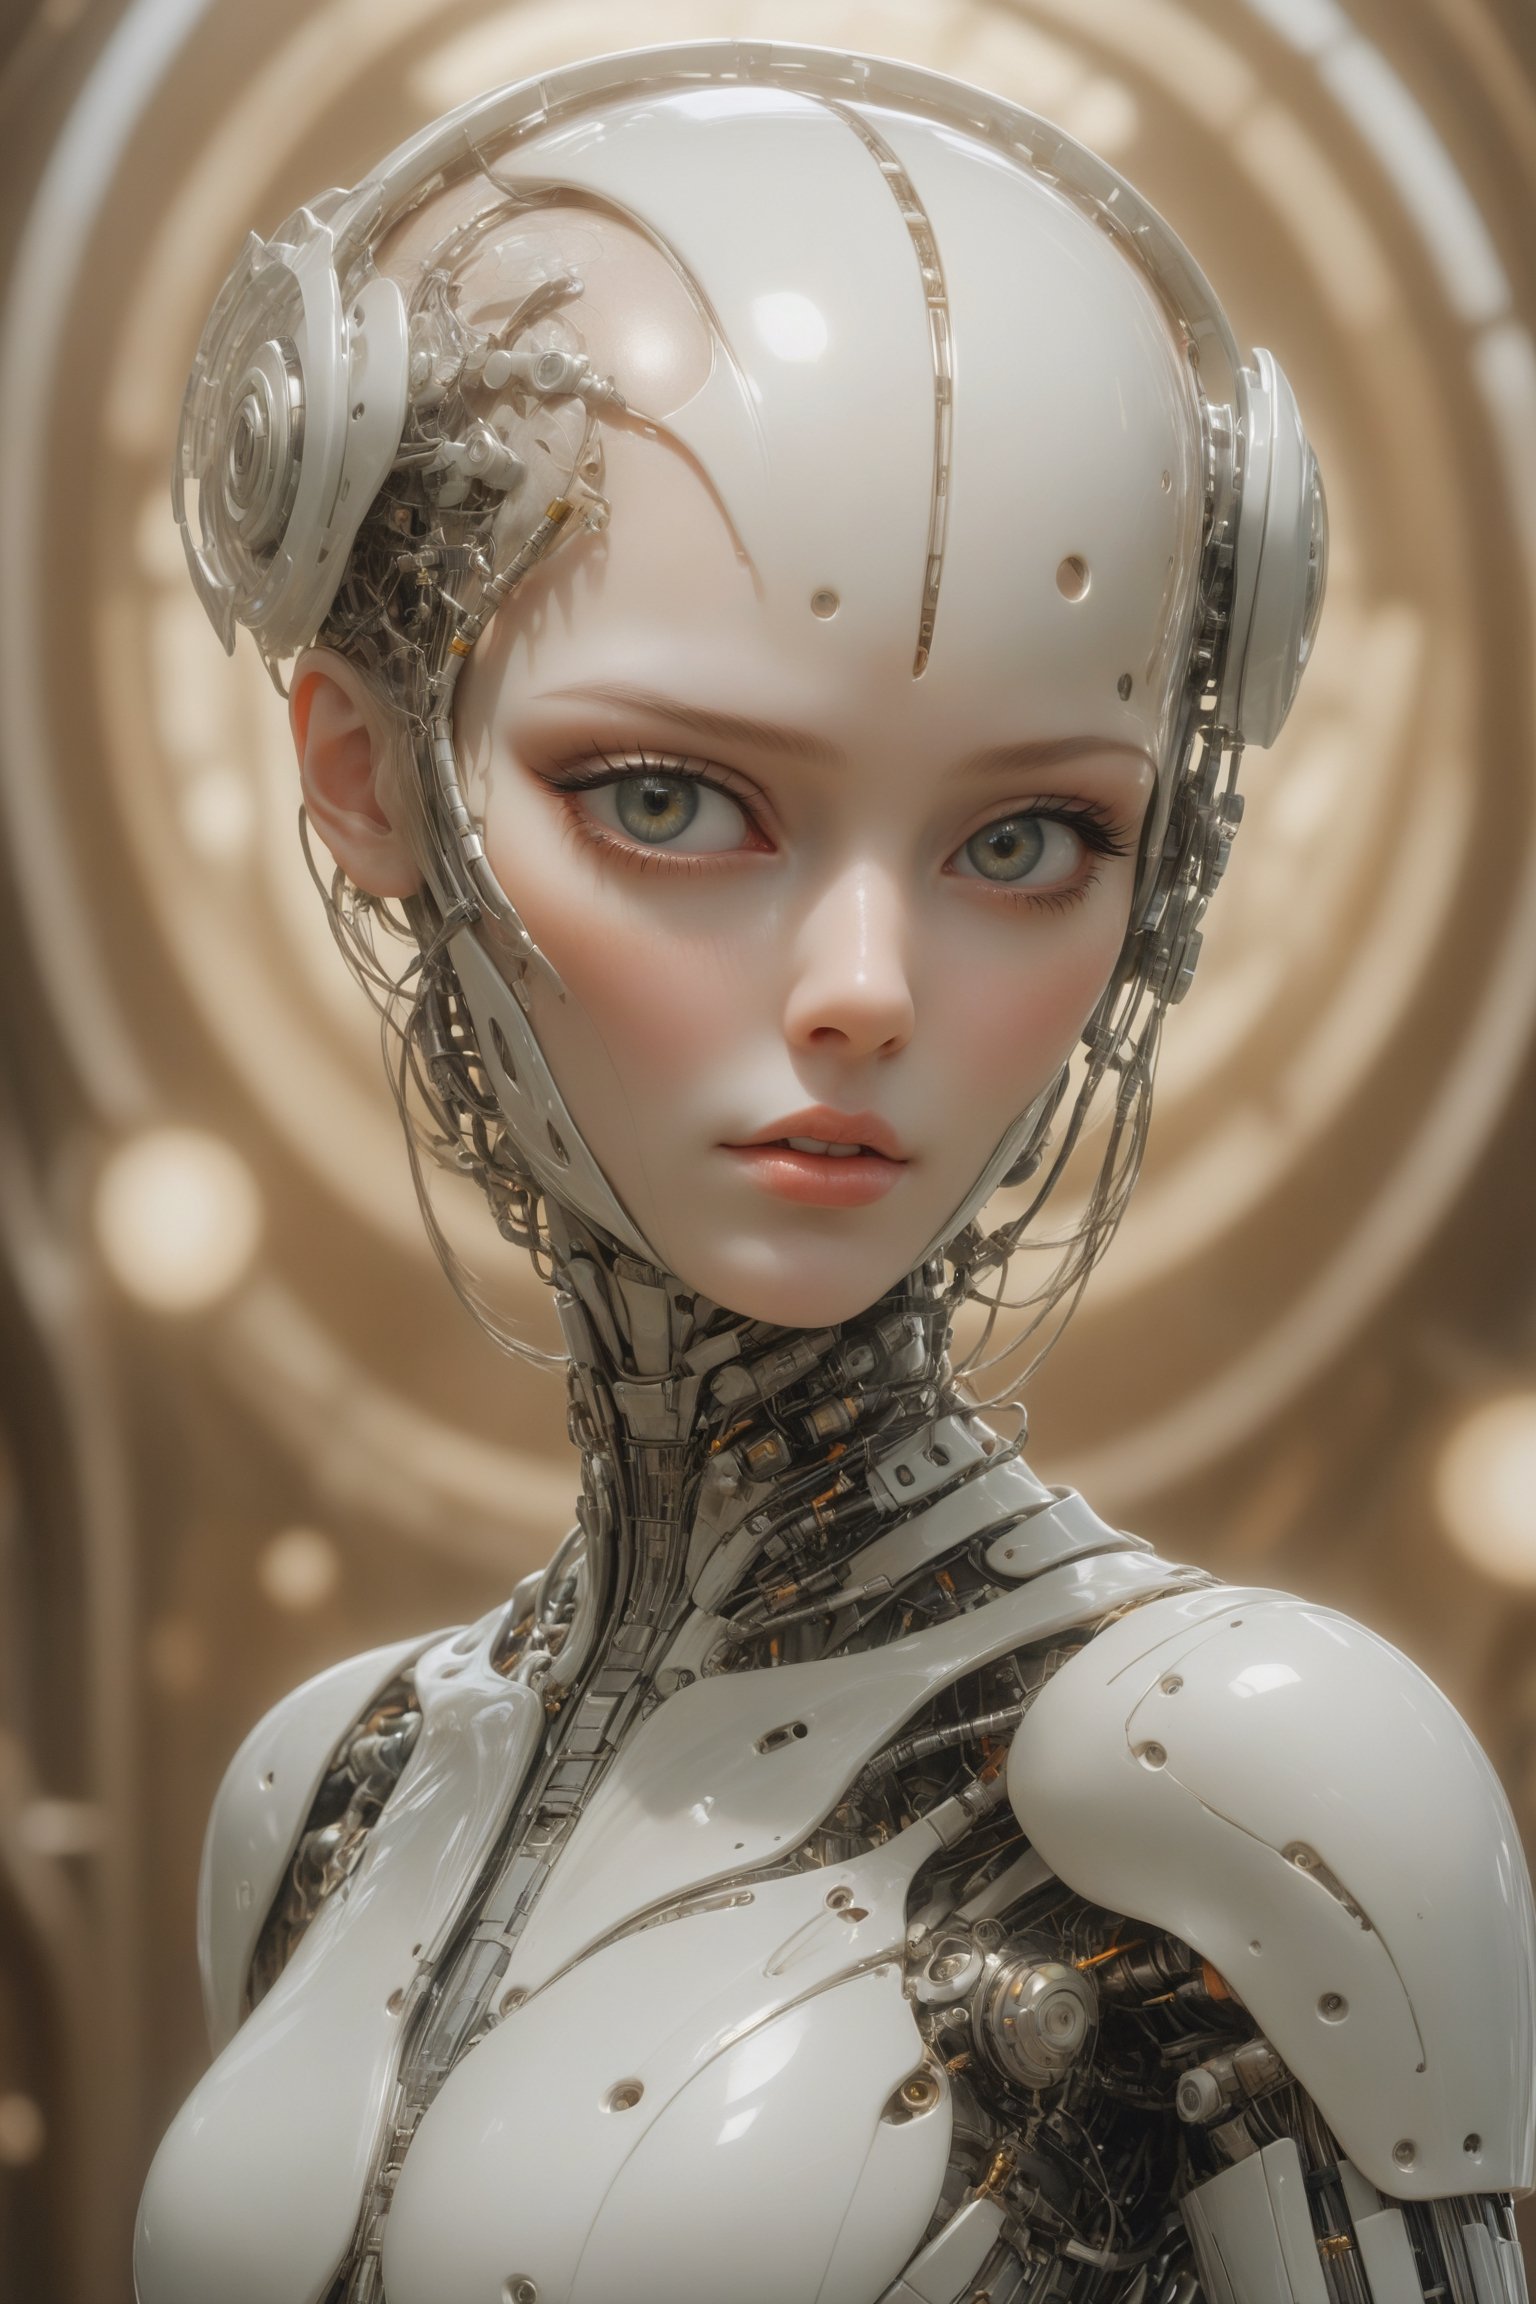 Masterpiece, {{{full_body}}}, {{{full_figure}}}, Oil painting of a beautiful female cyborg. bald head, pale white skin with a rubbery plastic look, glistening, pearlescent skin. beautiful face, made to look almost human, but has an eerie quality, vacant eyes, luscious pouting lips, real human breasts, dreamlike, hyperrealistic, instanely detailled soft color, dreamlike, surrealism, plain graduated pale background, intricate details, 3D rendering, octane rendering. Art in pop surrealism lowbrow creepy cute style. Inspired by Ray Caesar. Vintage art, ((art deco background)), opaque colors, light grain, indirect lighting, aesthetic portrait, DonMCyb3rN3cr0XL,cyborg,science fiction,close up